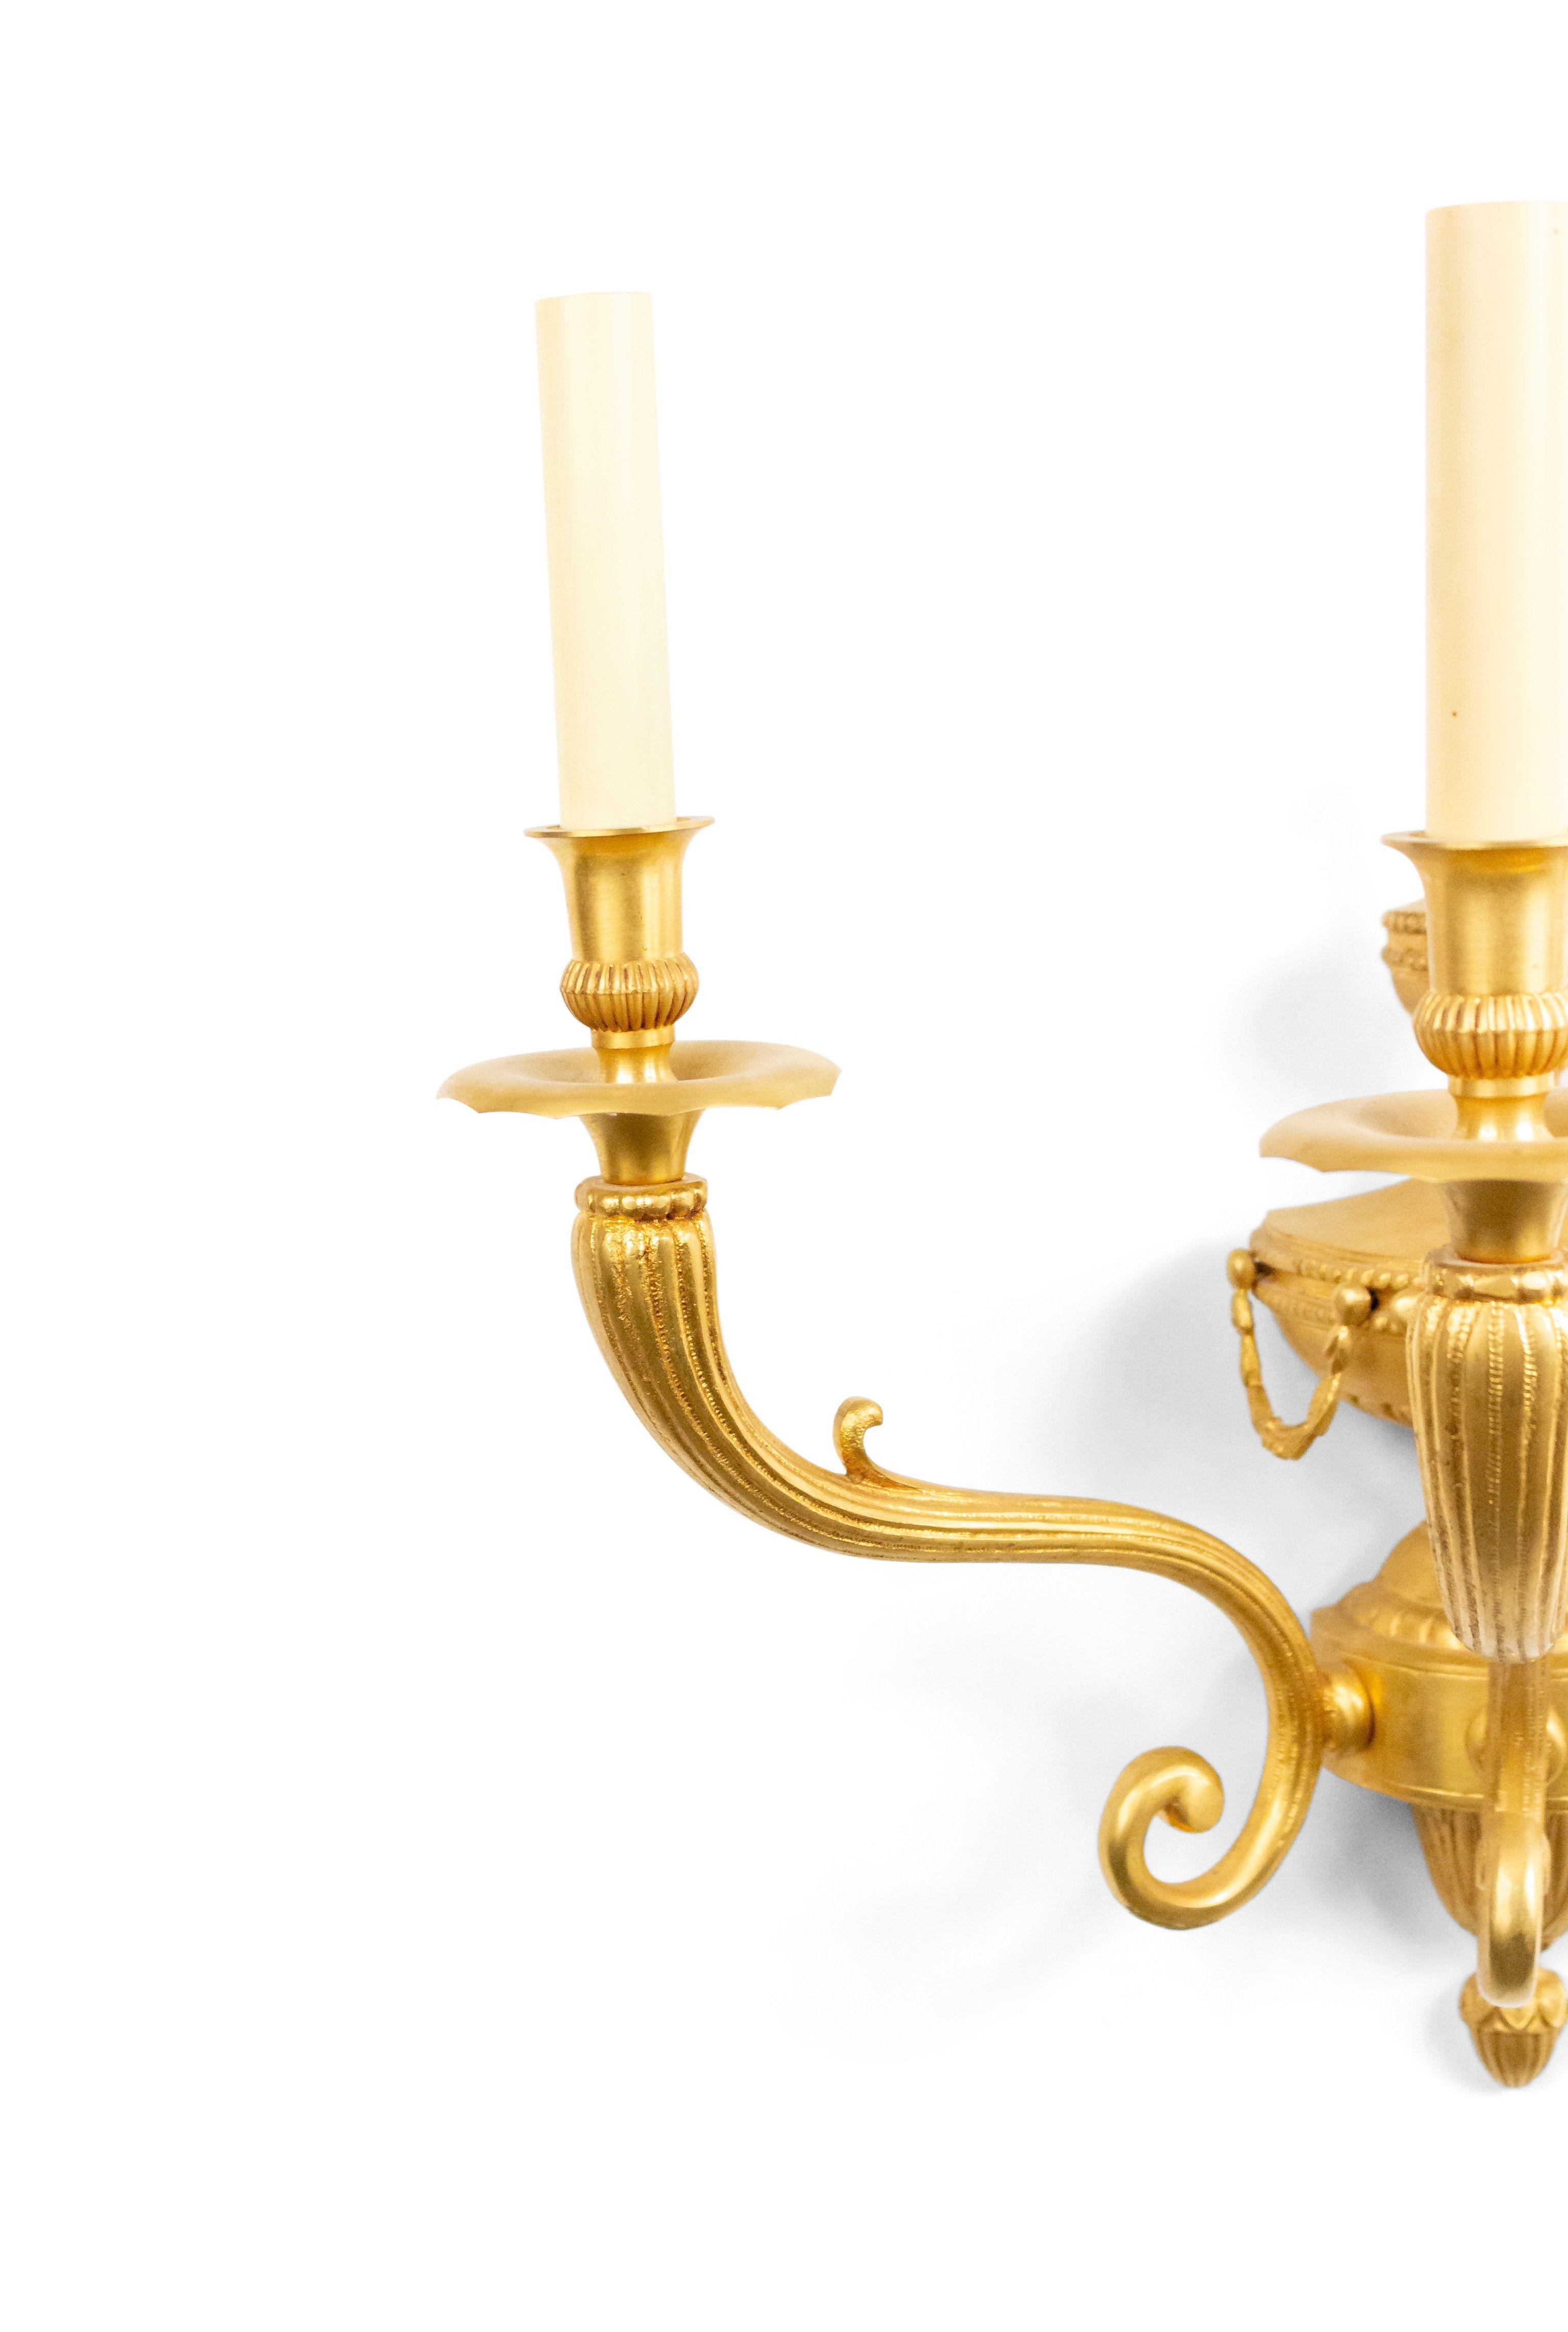 Pair of English Adam-style (20th century) bronze dore wall sconces with three fluted scroll arms and urn and festoon design centers. (priced as pair).
      